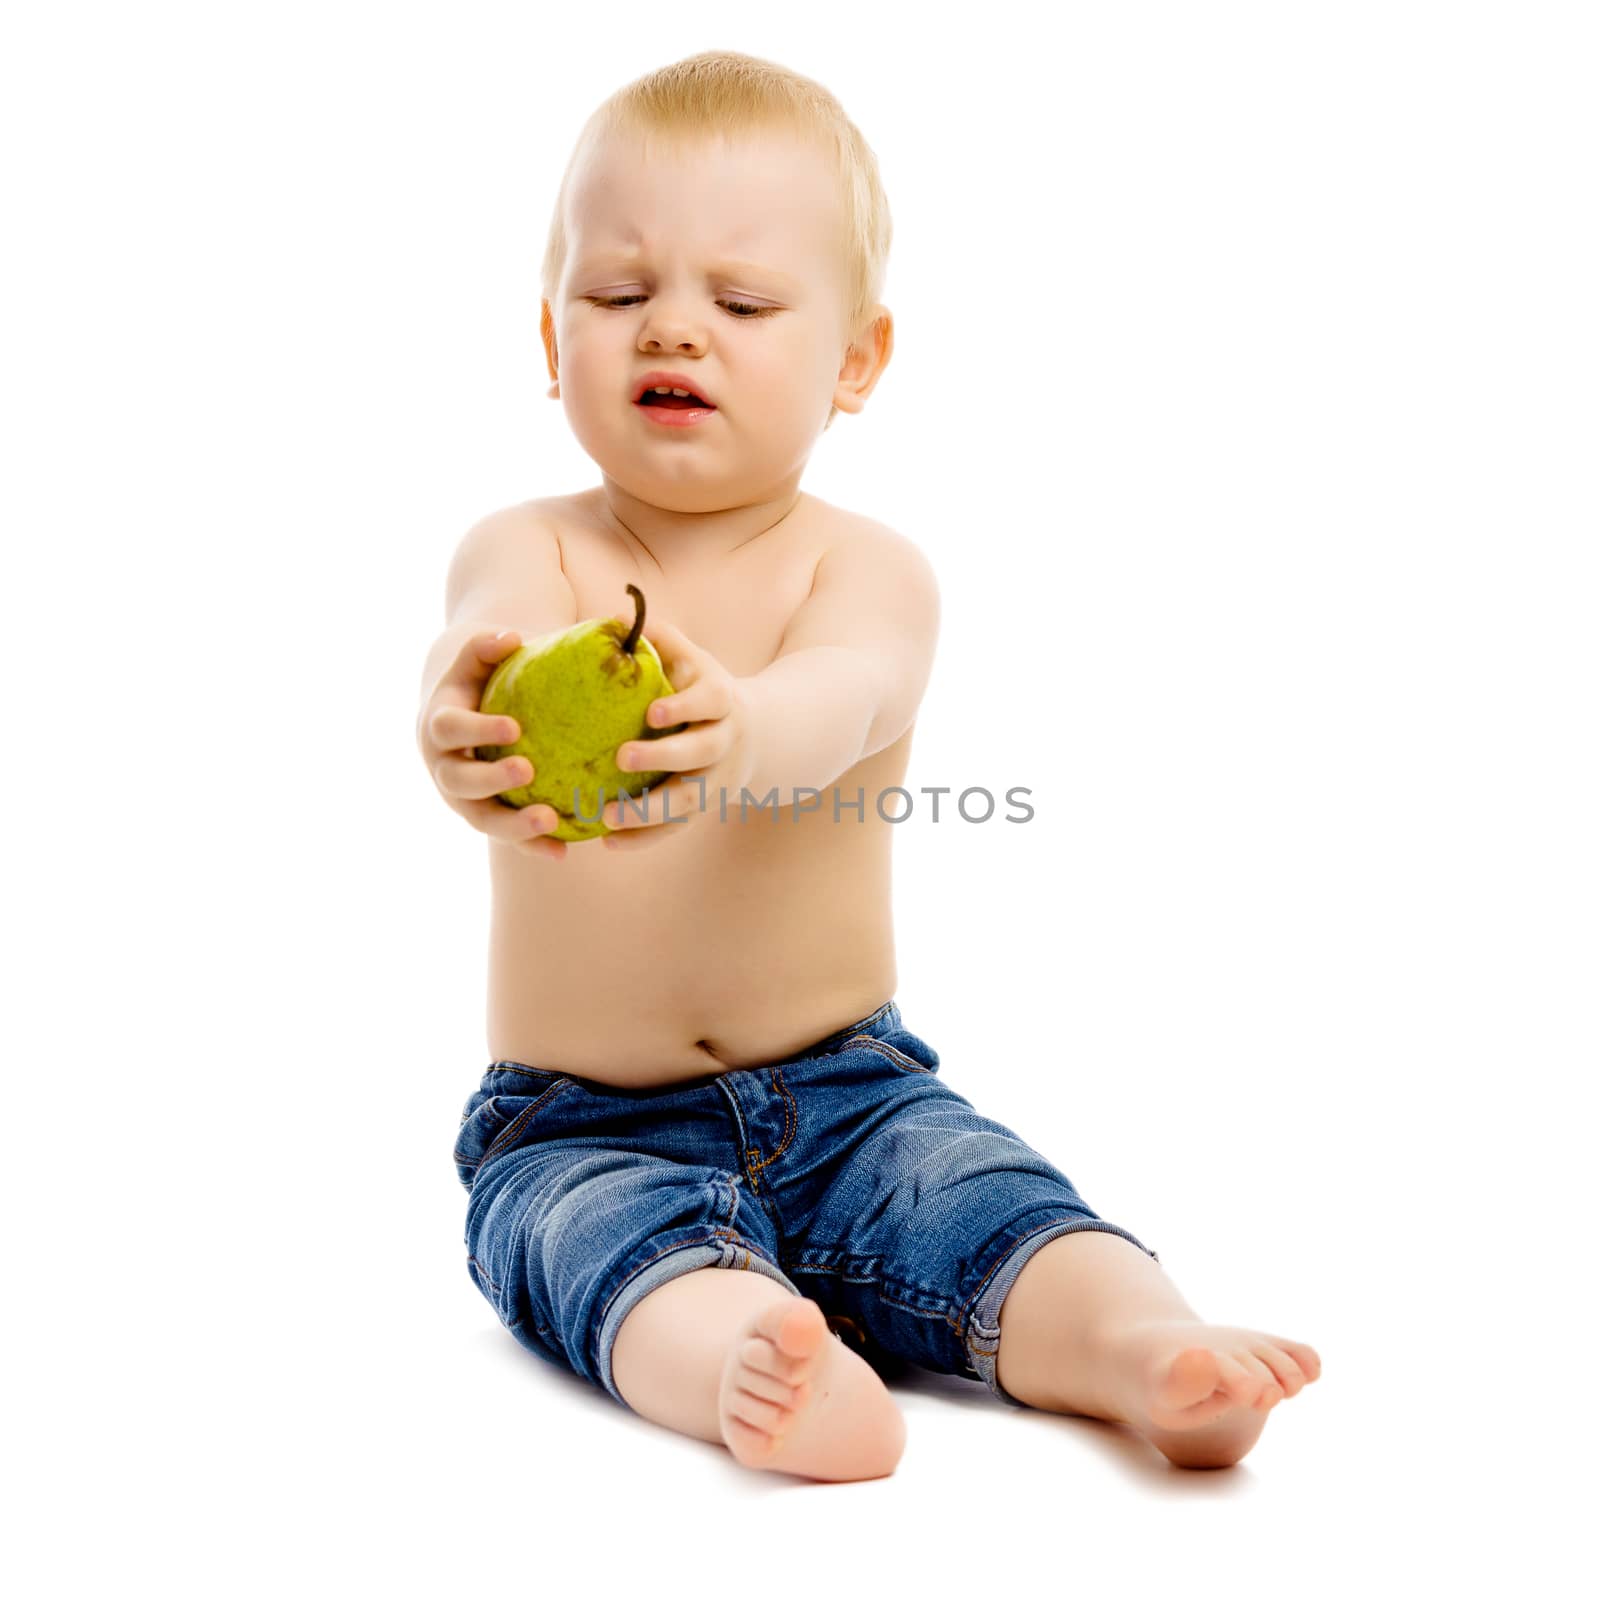 Little dissatisfied boy disclaims pears on a white background